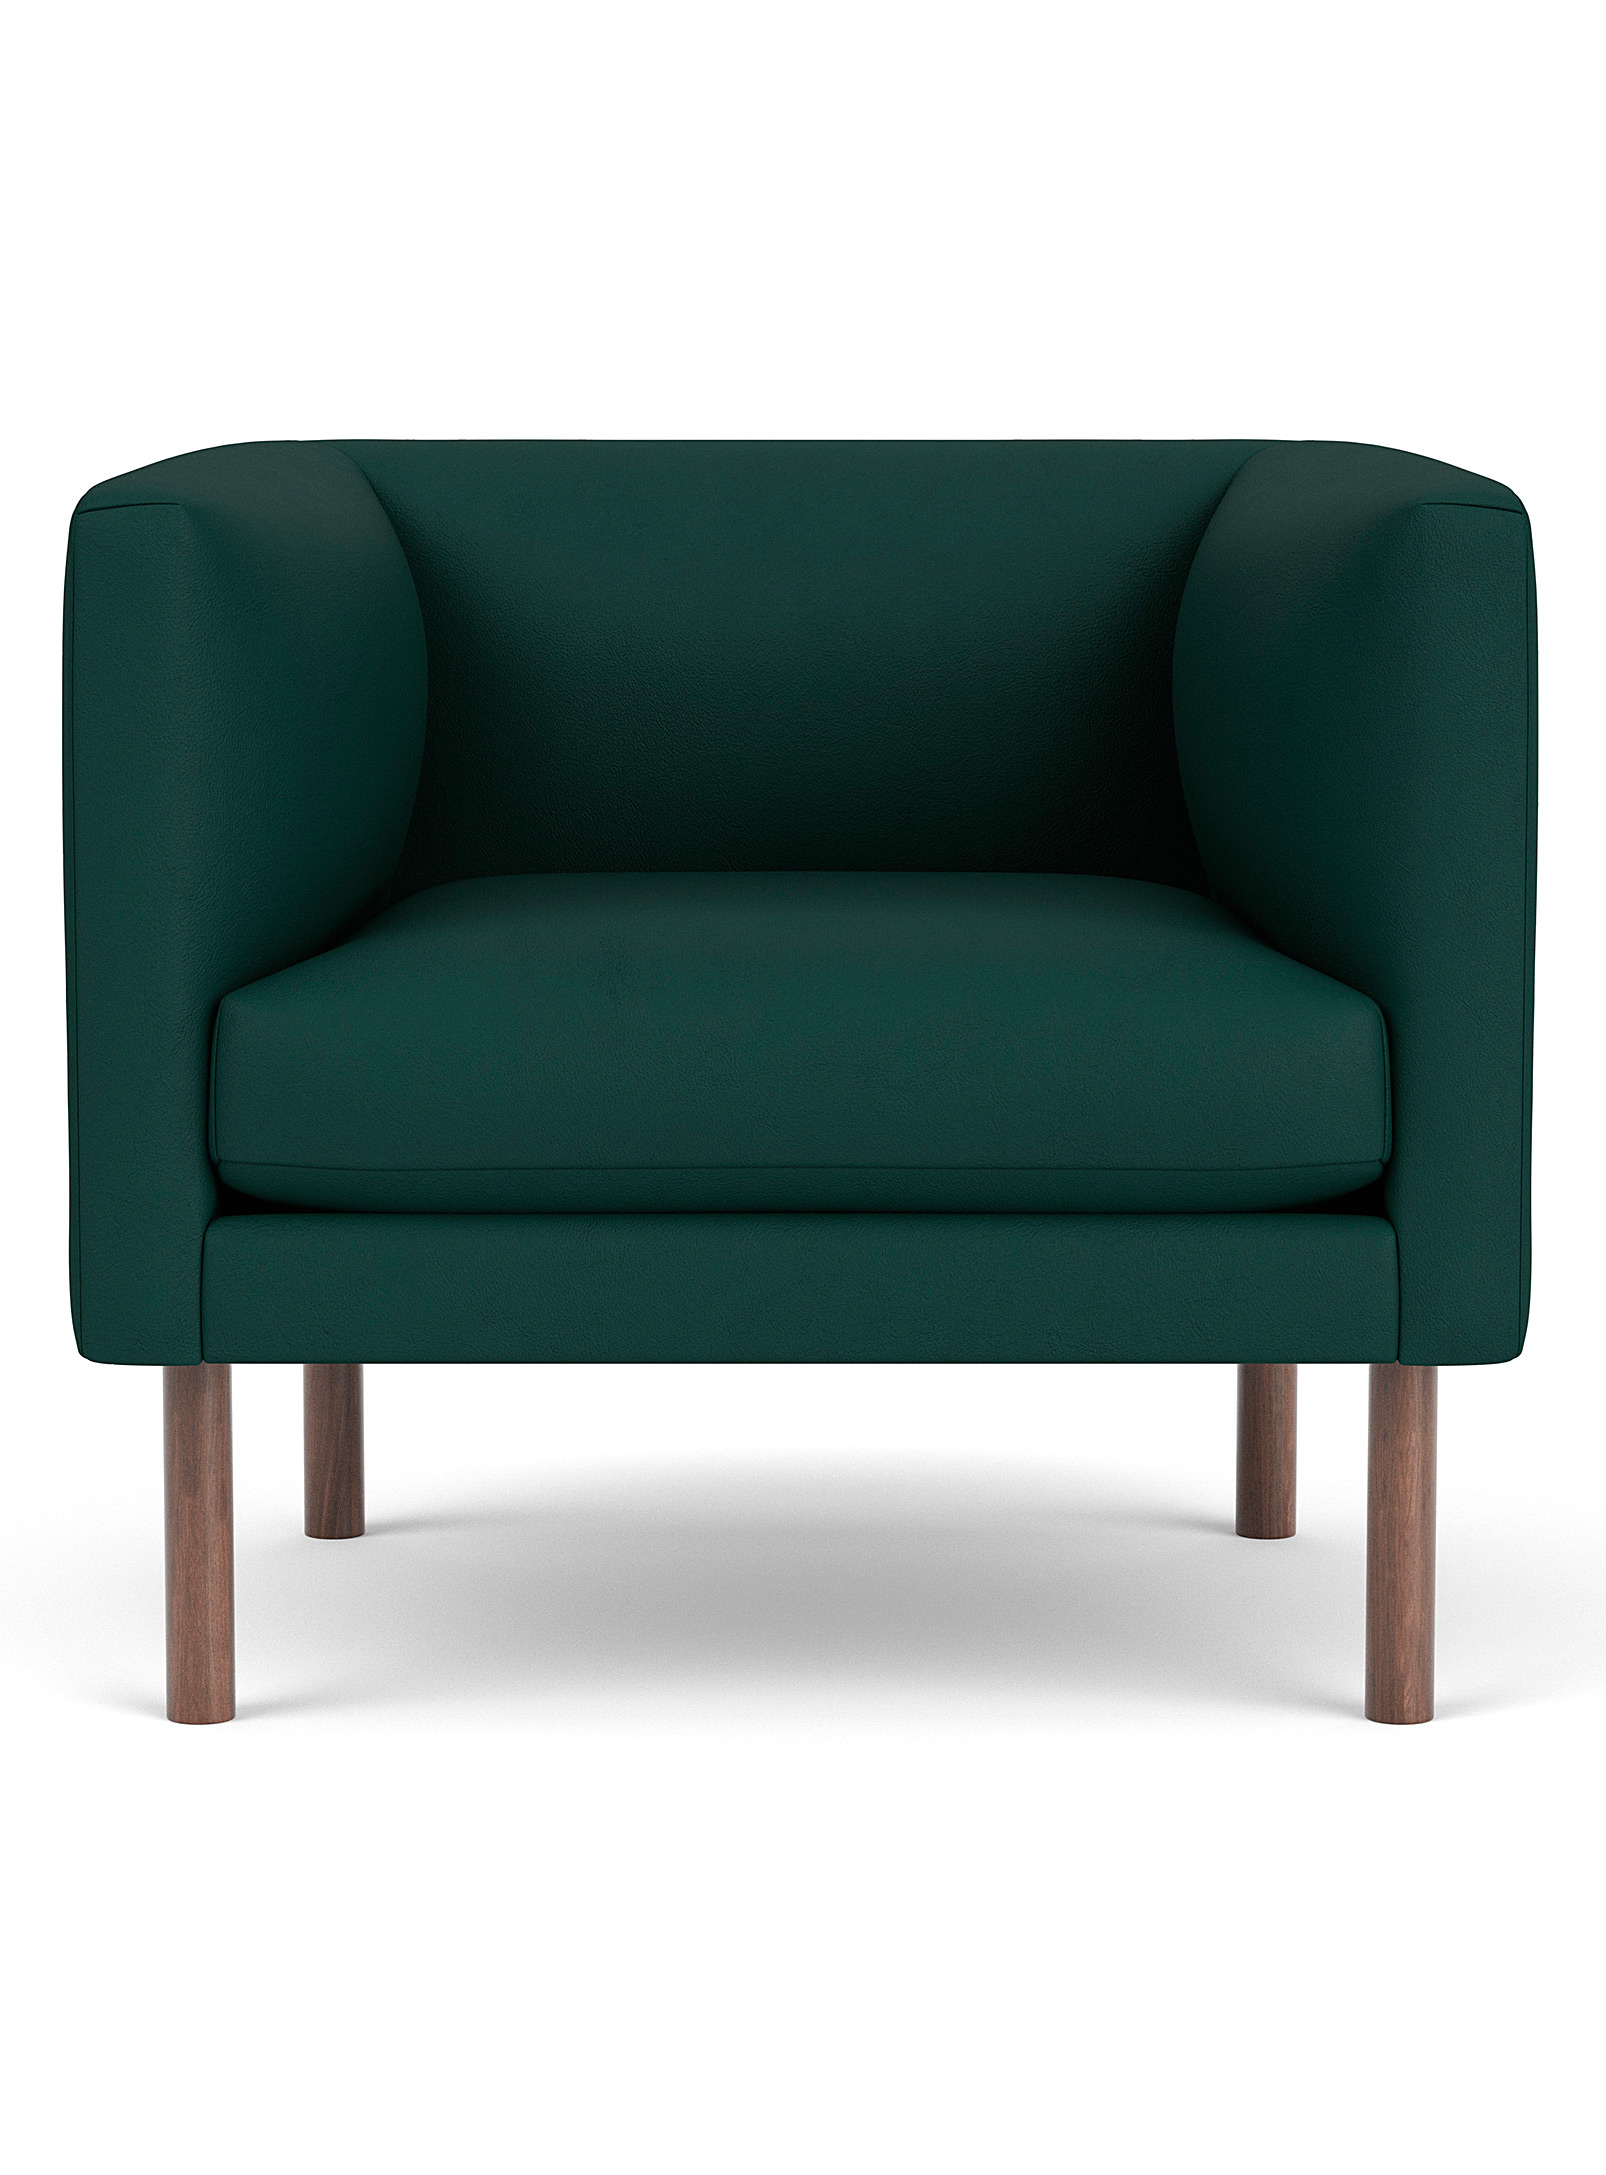 Eq3 Green Leather Retro-style Club Chair In Mossy Green